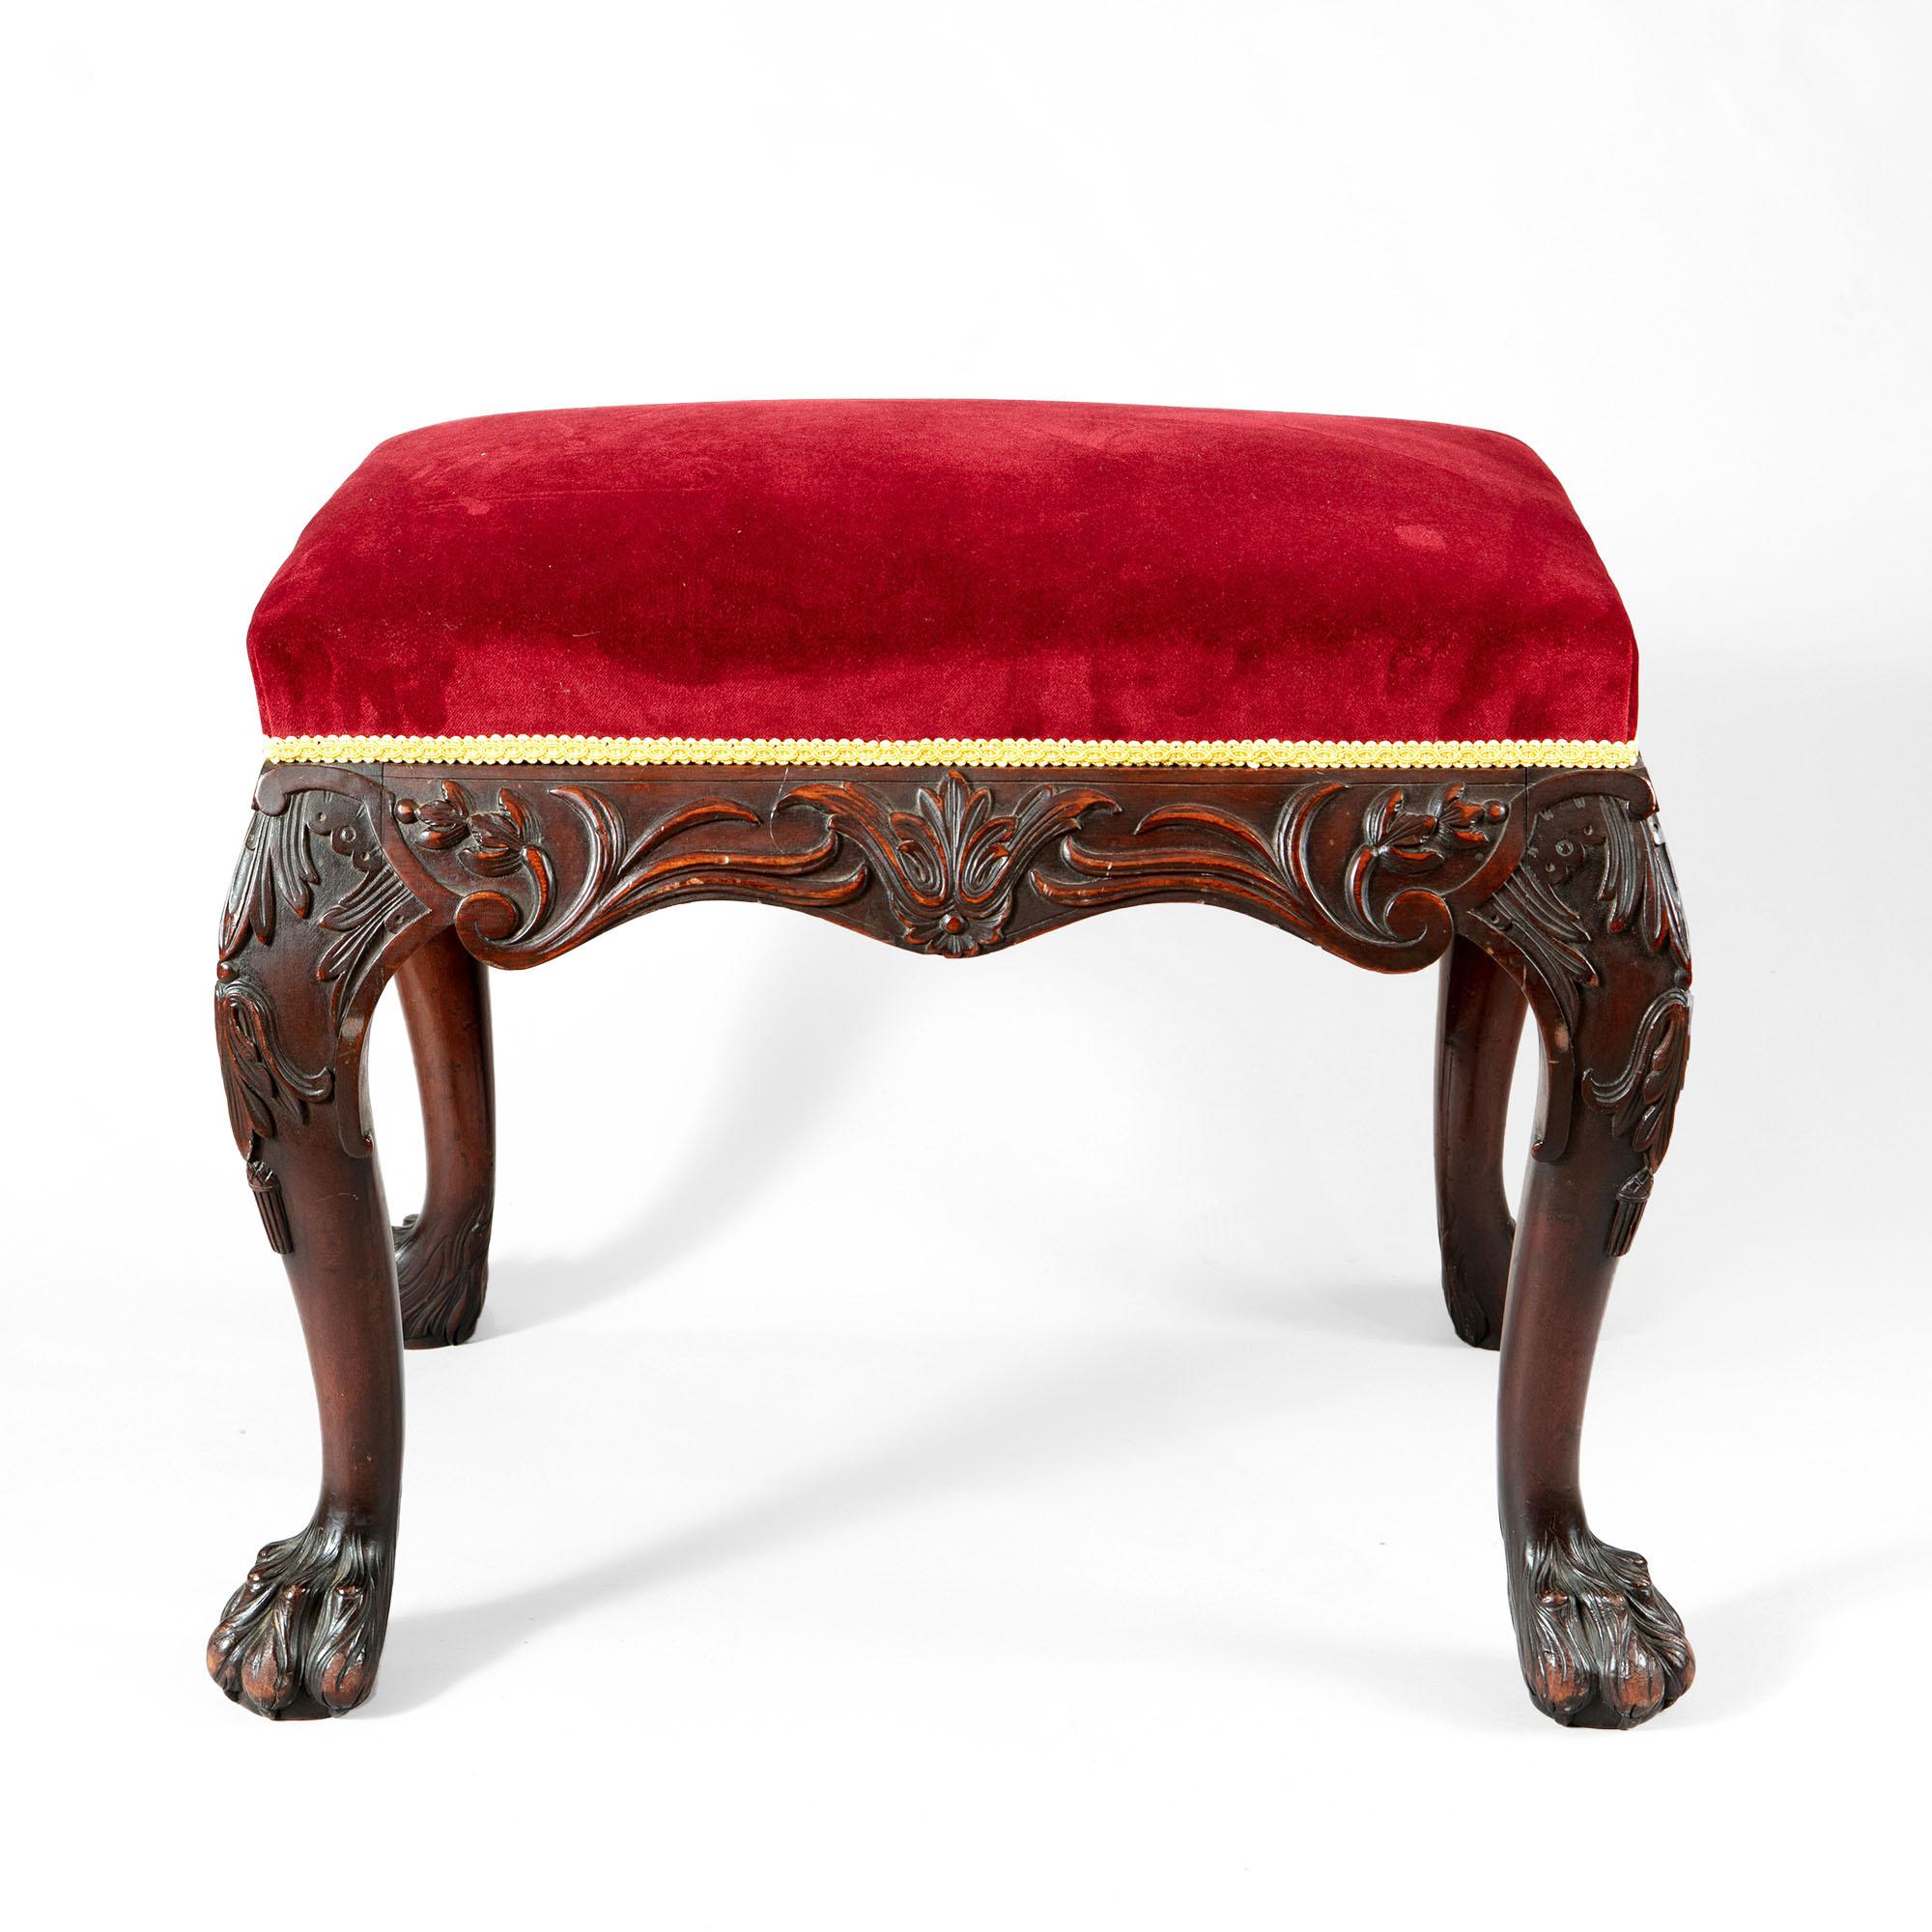 Nicholas Wells antiques is pleased to present for sale a 19th century stool with bold carved details and ornament around the apron consisting of acanthus leaves, strapwork, and floral motifs. The cabriole legs terminating in bold hairy paw